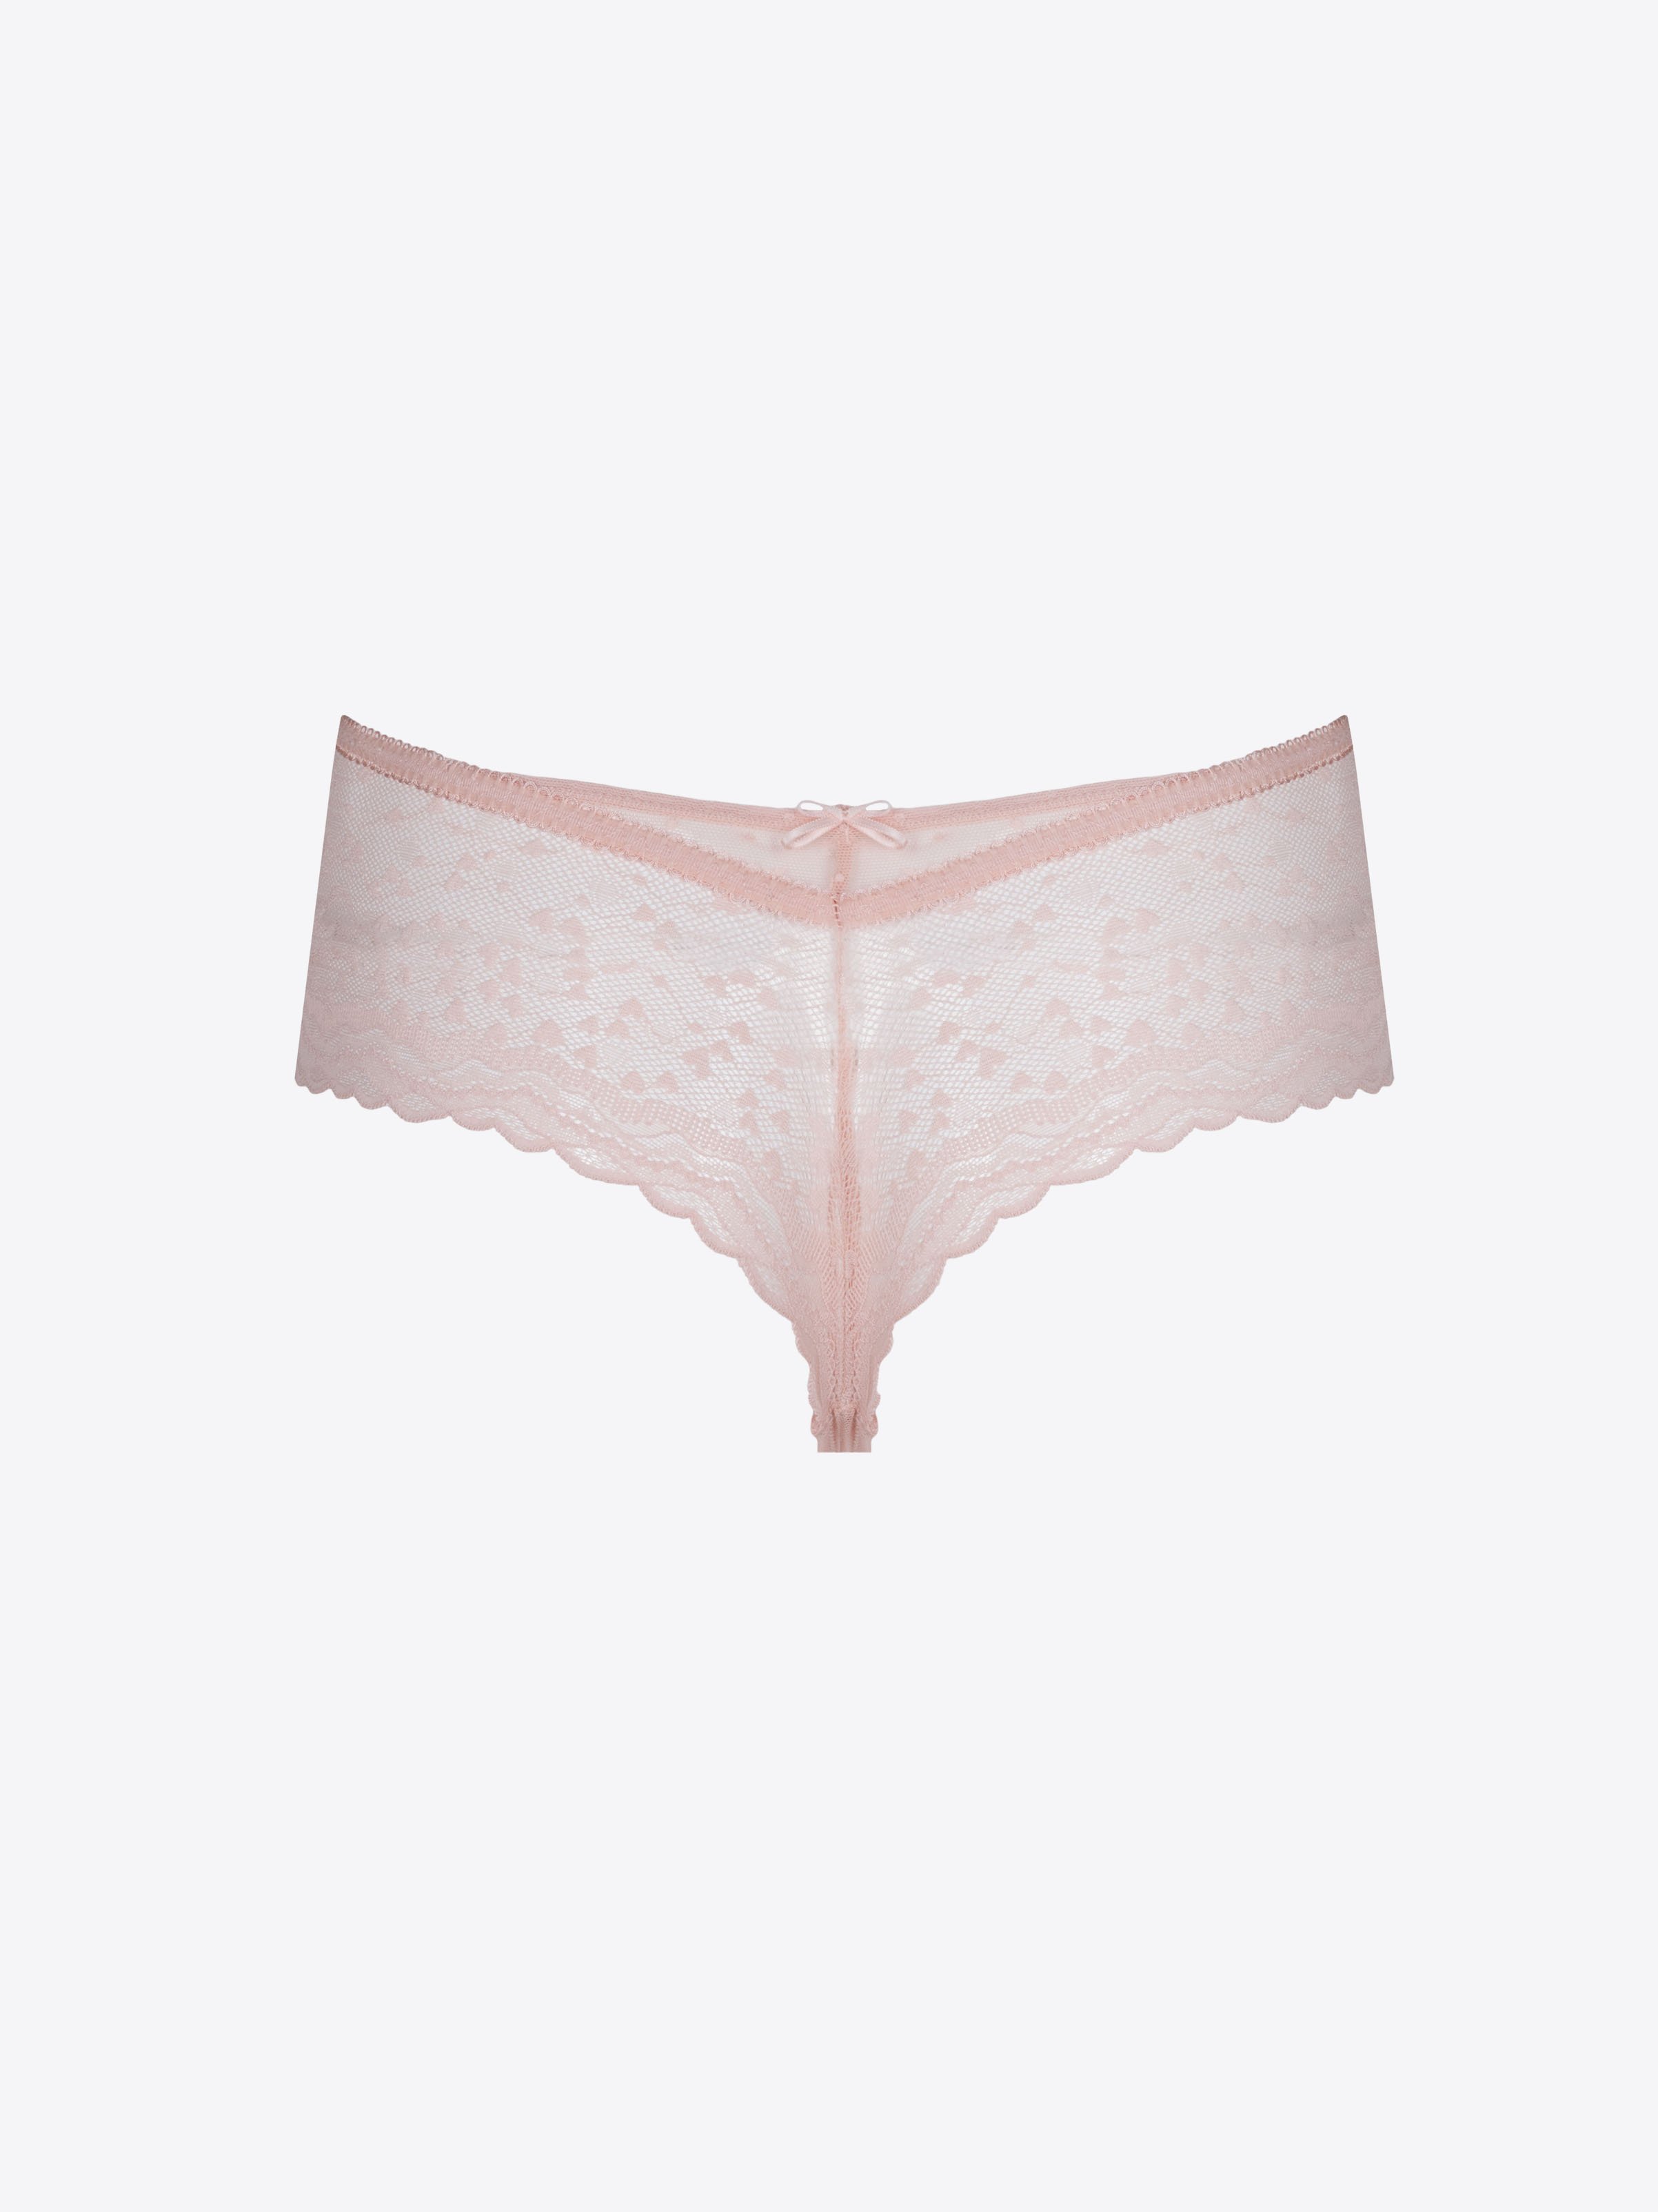 Lucca Hipster Thong - Creme d'rose - CA$7.80 - CHANGE Lingerie